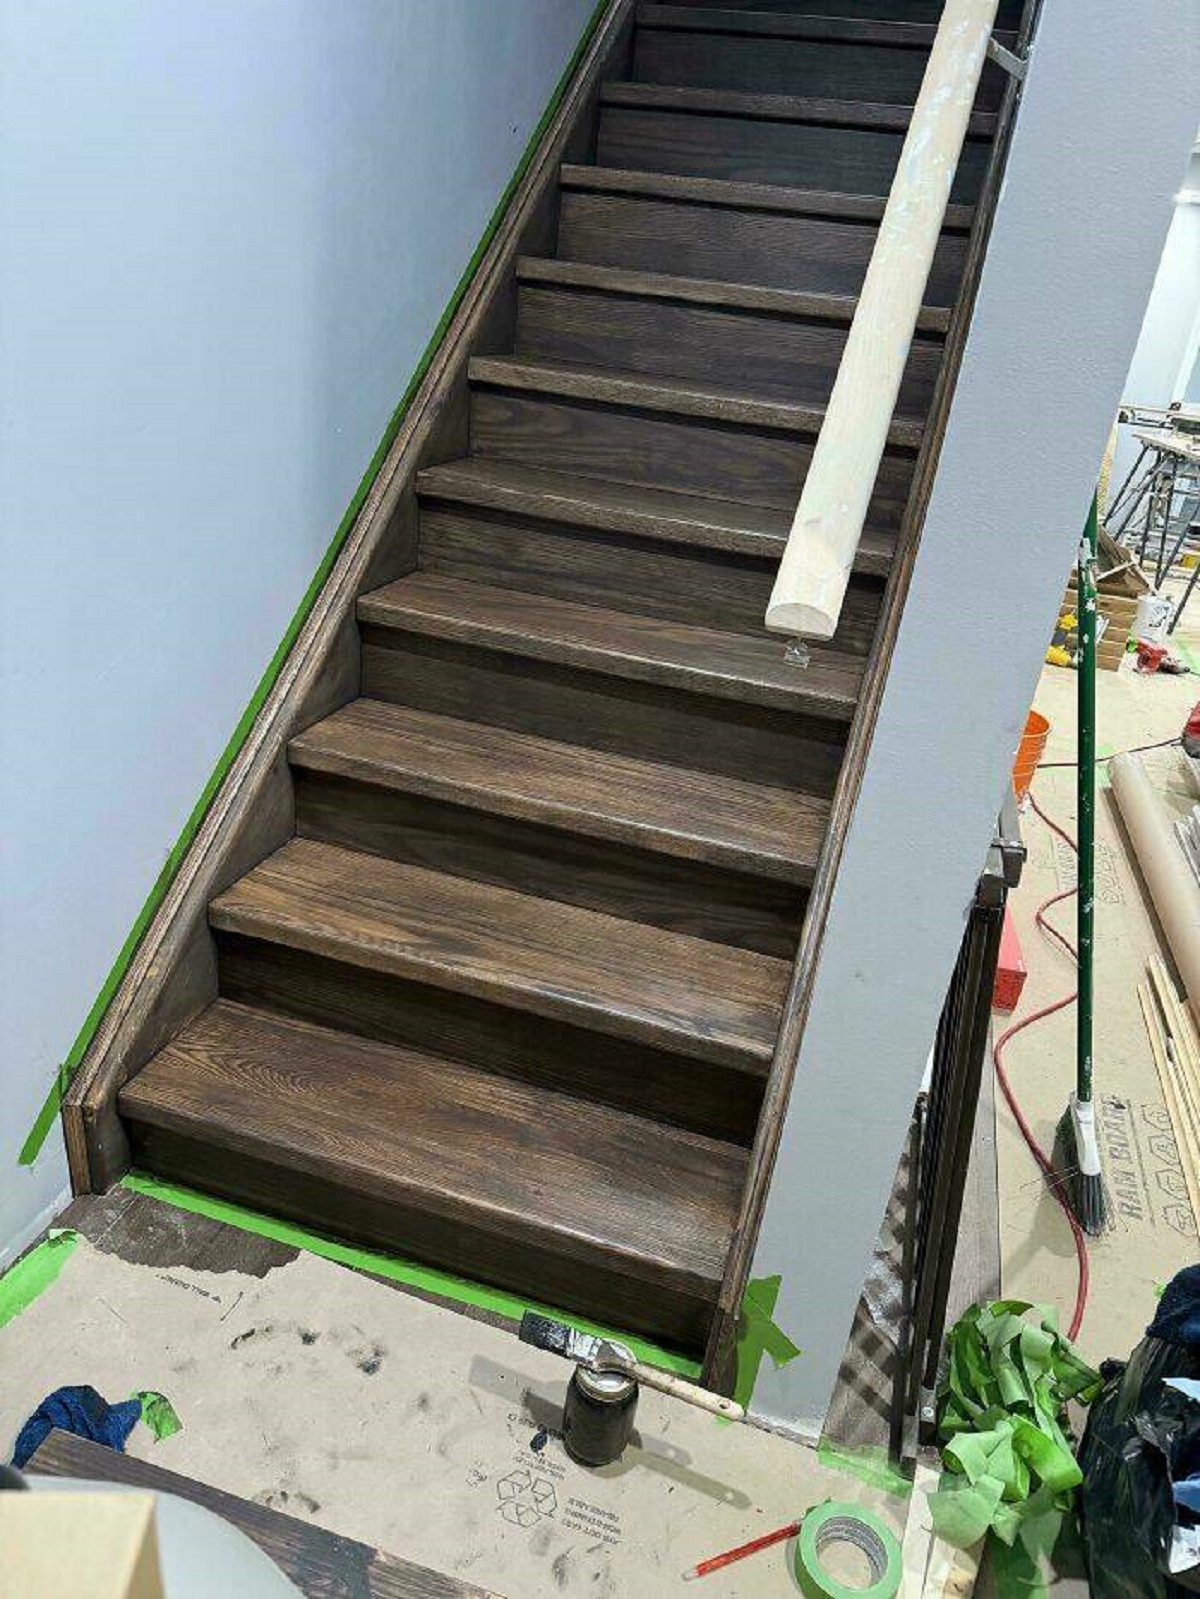 "Guess Who Forgot Their Exit Plan After Staining The Stairs. Send Help"